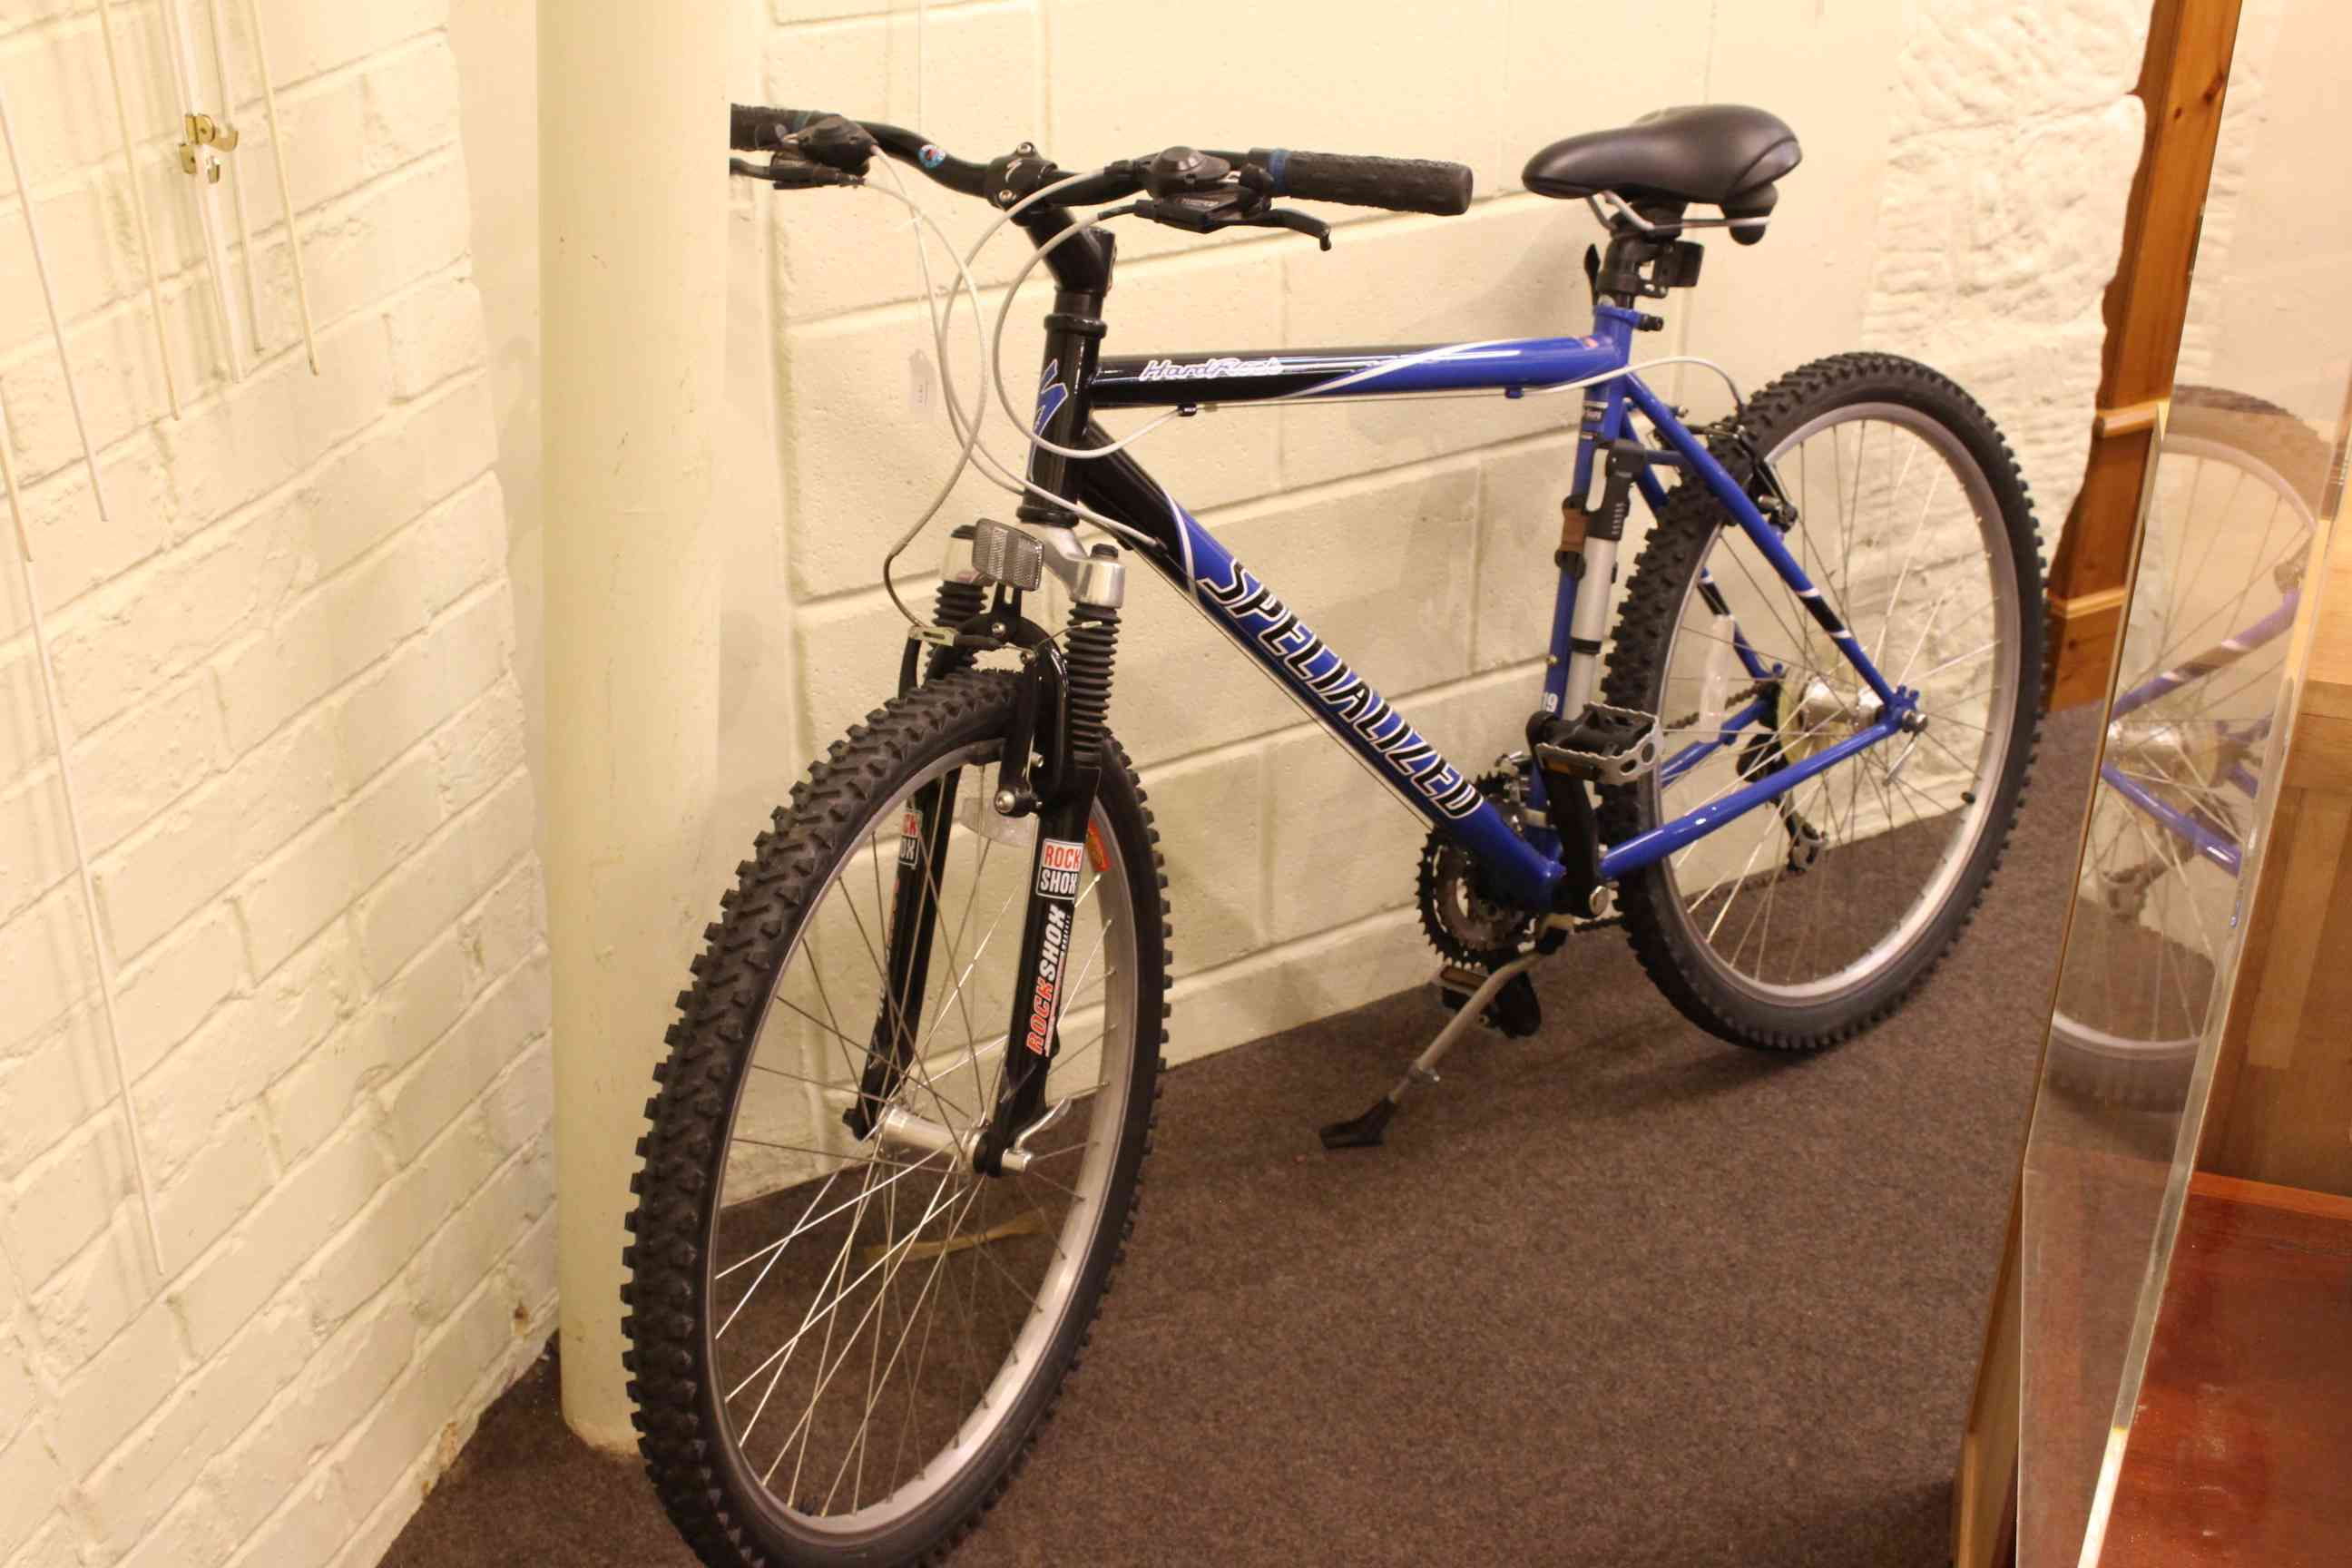 Specialised hard rock mountain bike, with Shimano gears and brakes and Rock Shox front suspension.